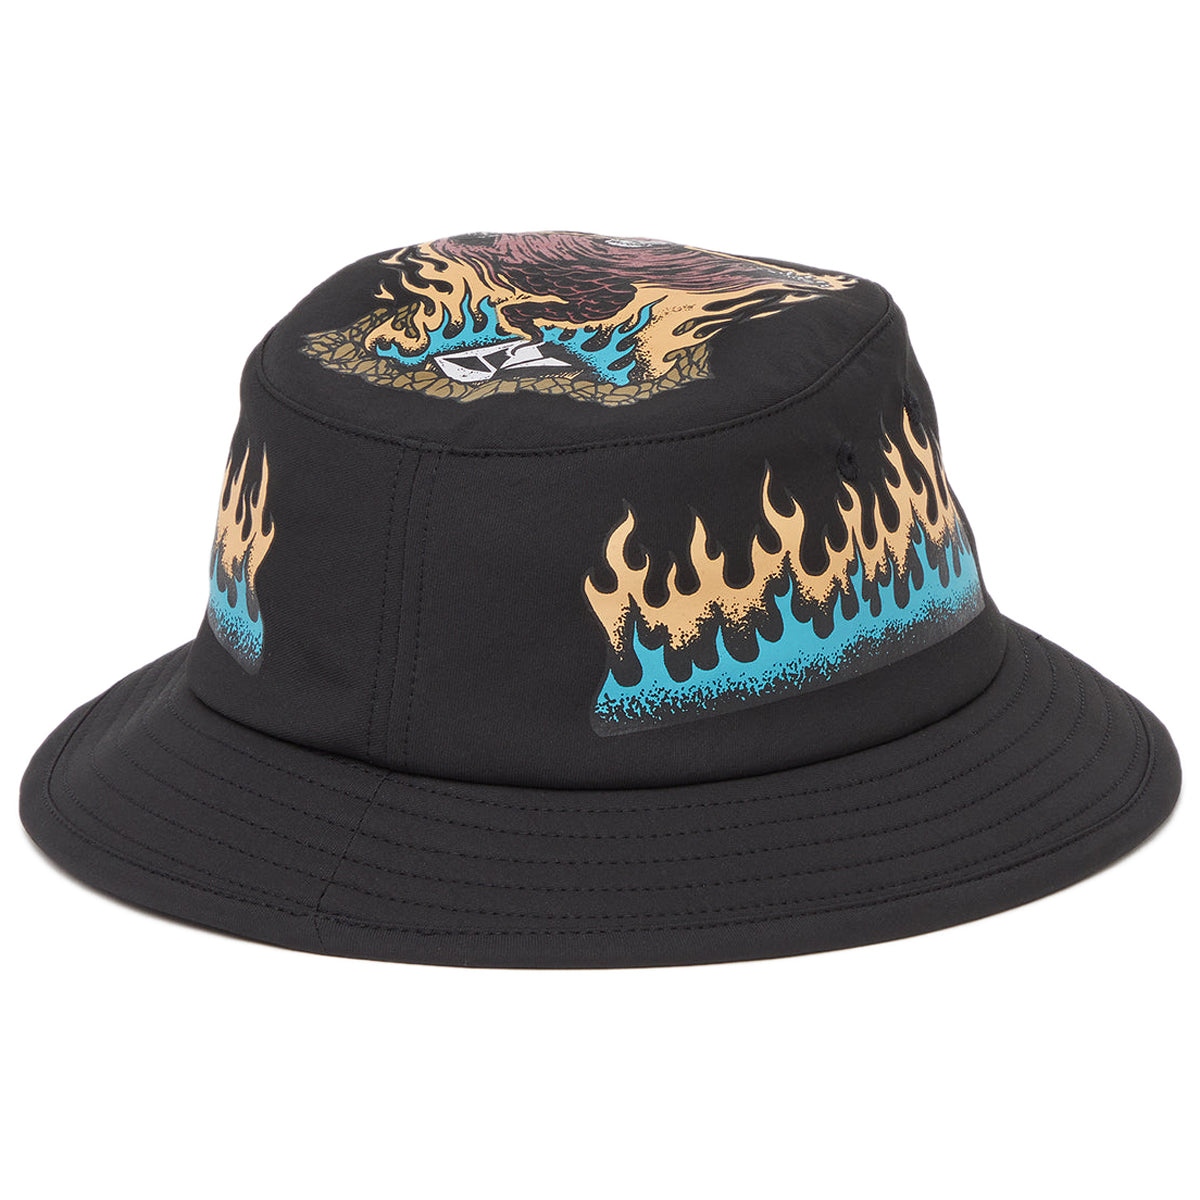 Volcom Stone Ghost Bucket Hat - Stealth image 2